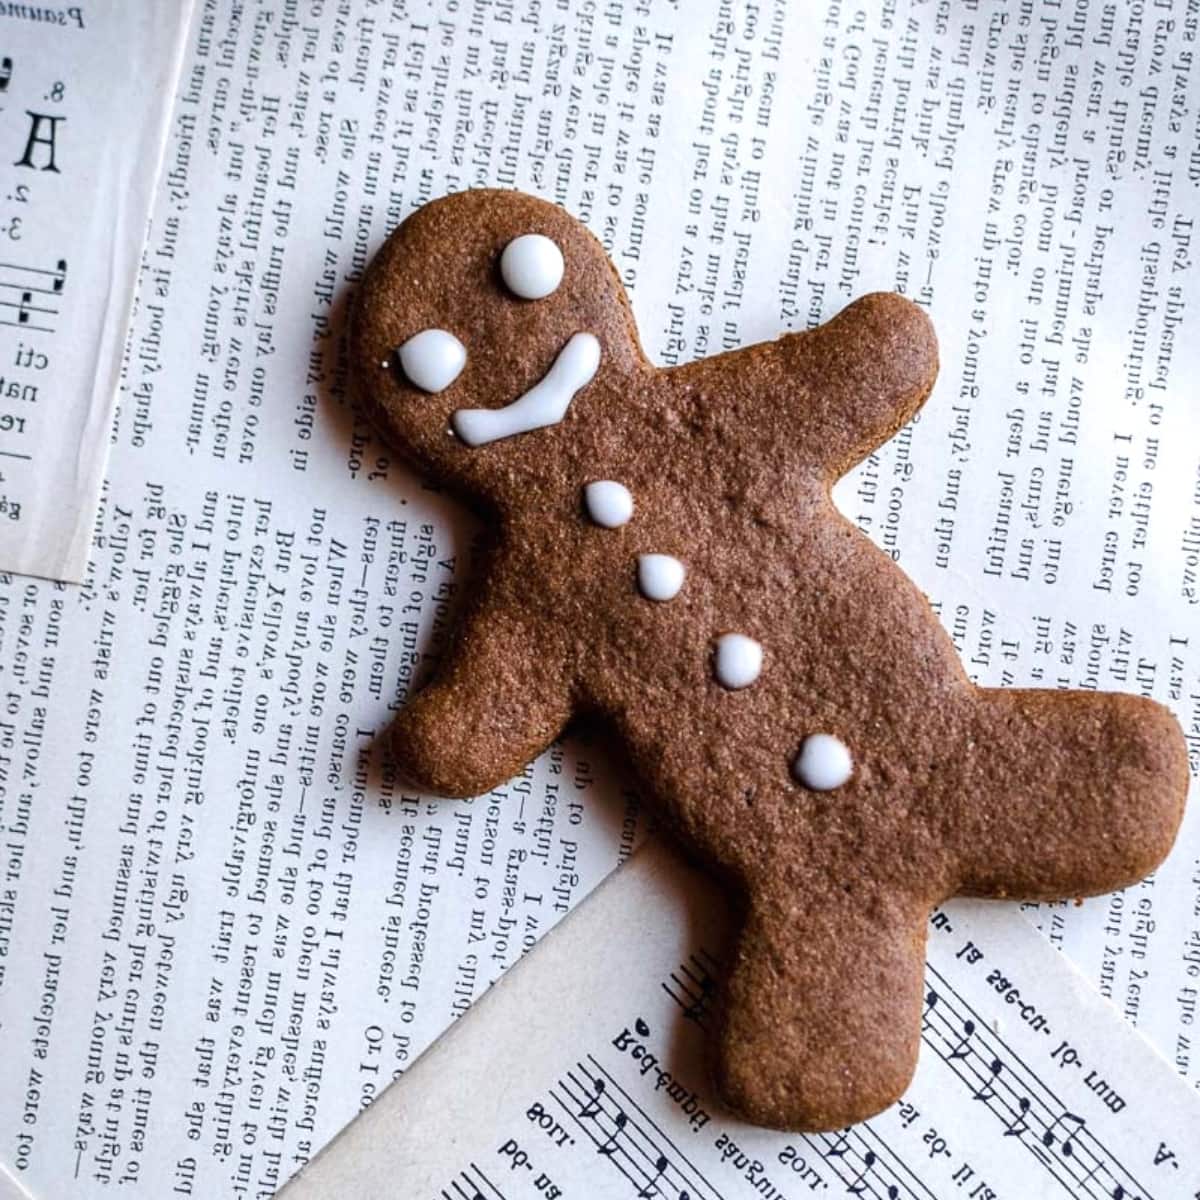 A brown gingerbread man cookies resting on sheets of paper from a book.